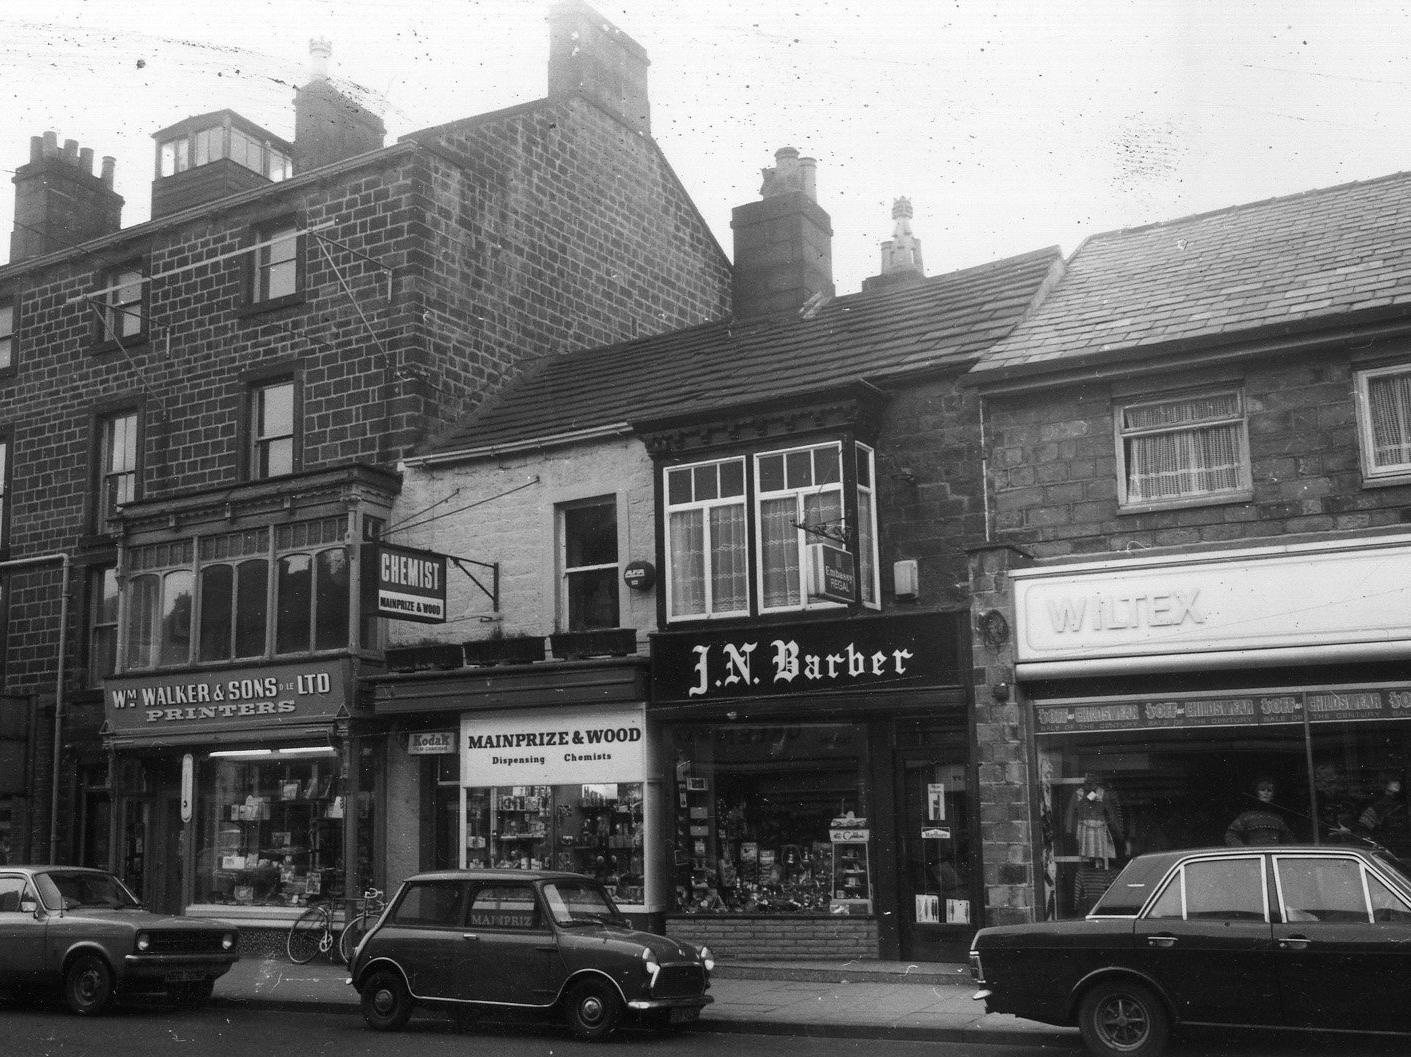 Kirkgate. Pictured, right to left, Wiltex ladies' and children's wear, J.N. Barber, tobacconist, Mainprize & Wood, dispensing chemists, followed by William Walker & Sons Ltd, printers.